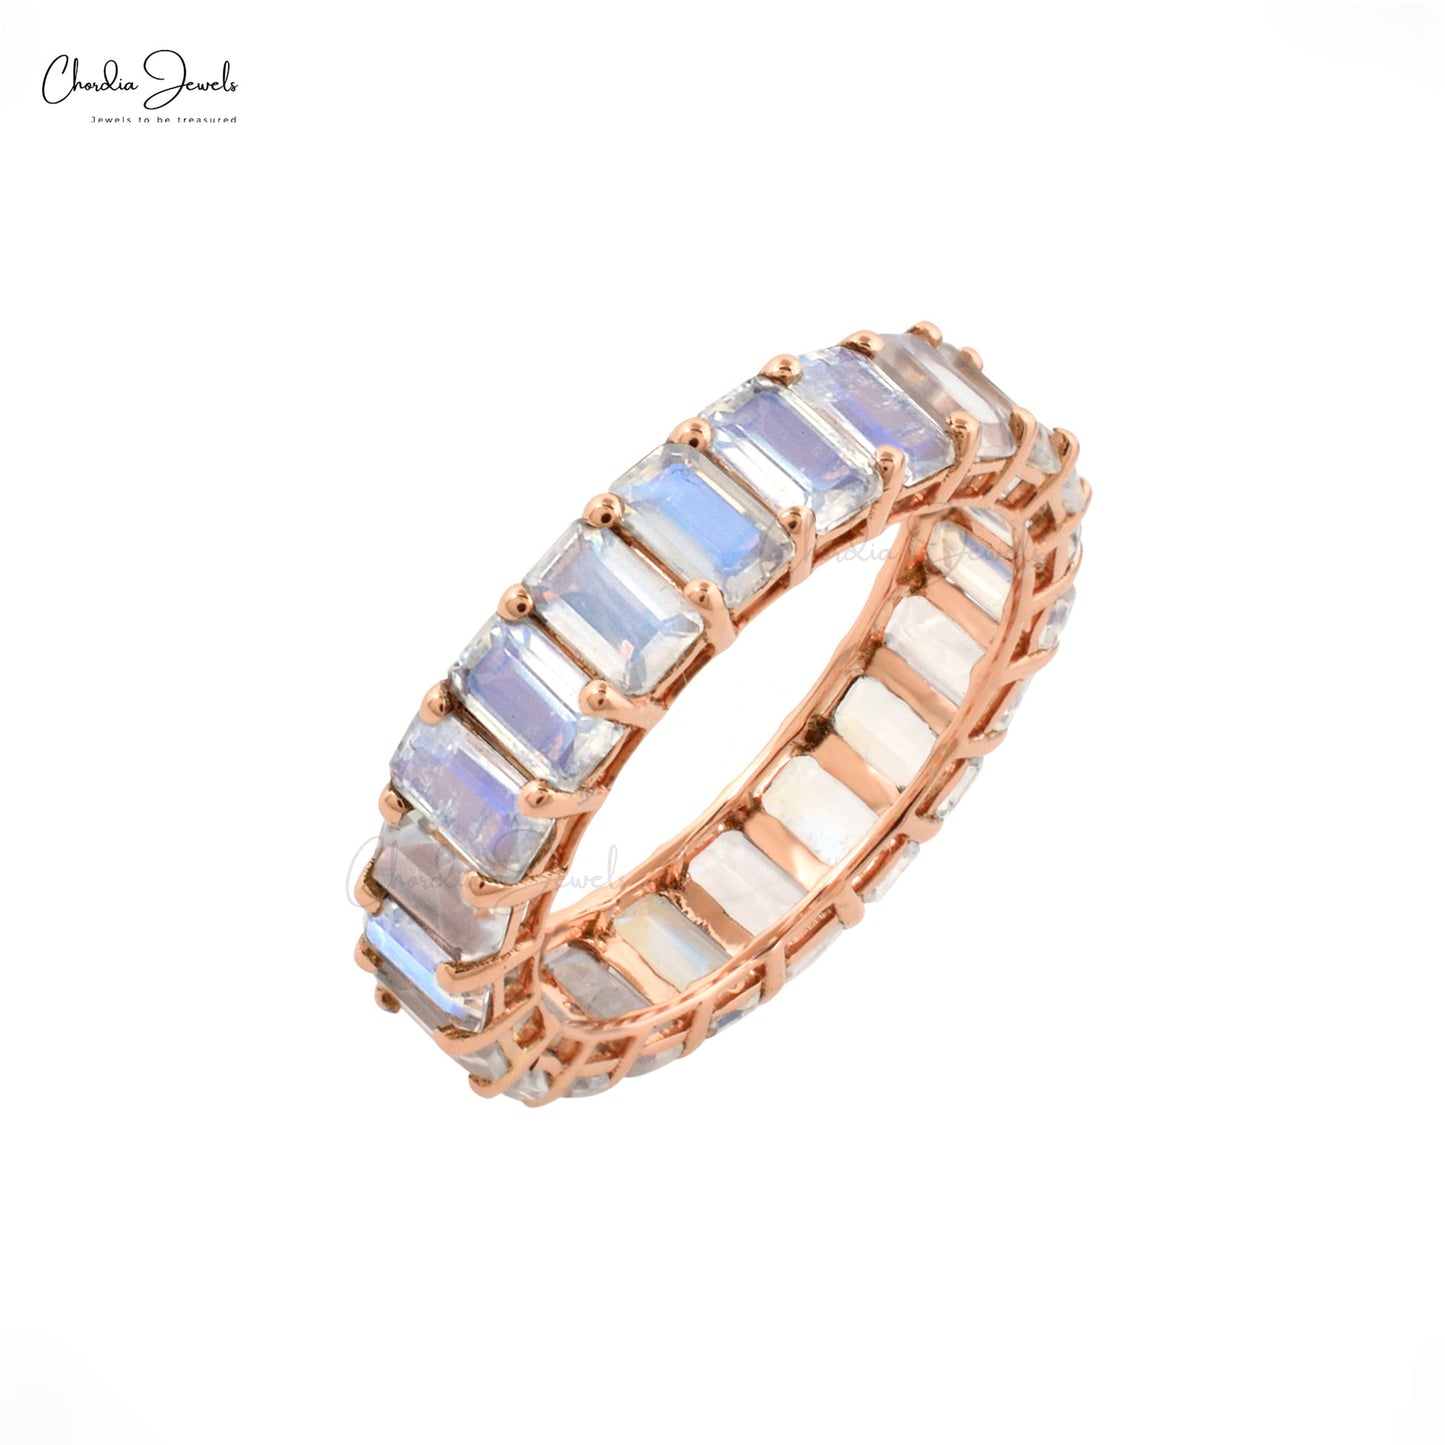 Load image into Gallery viewer, Genuine Rainbow Moonstone 5x3mm Octagon Cut Eternity Band 14k Solid Rose Gold Minimalist June Birthstone Ring For Engagement
